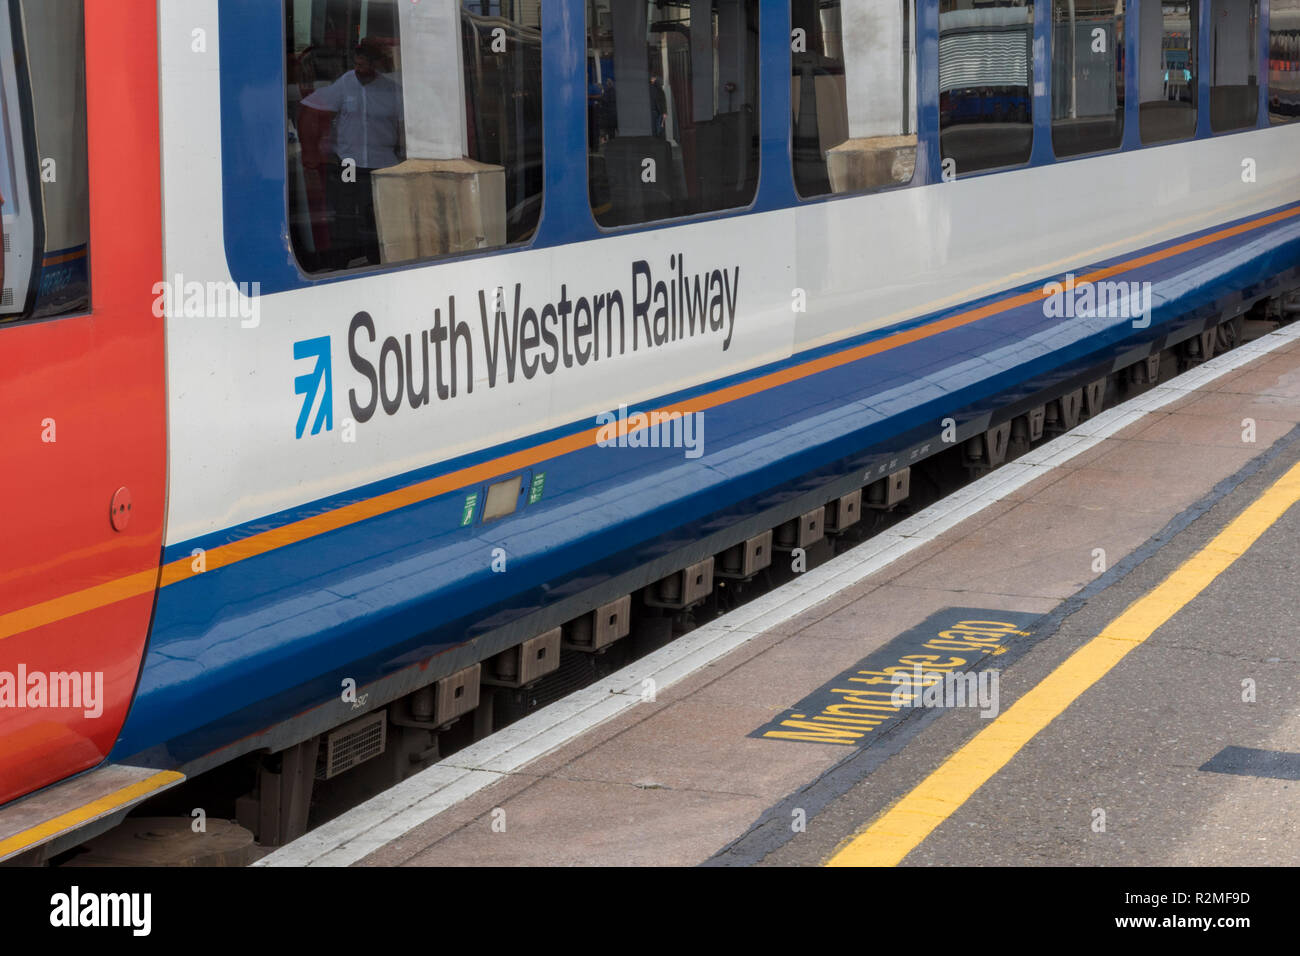 south western railway train in a platform at London waterloo station. mind the gap painted on the platform edge at railway station. commuting by rail. Stock Photo